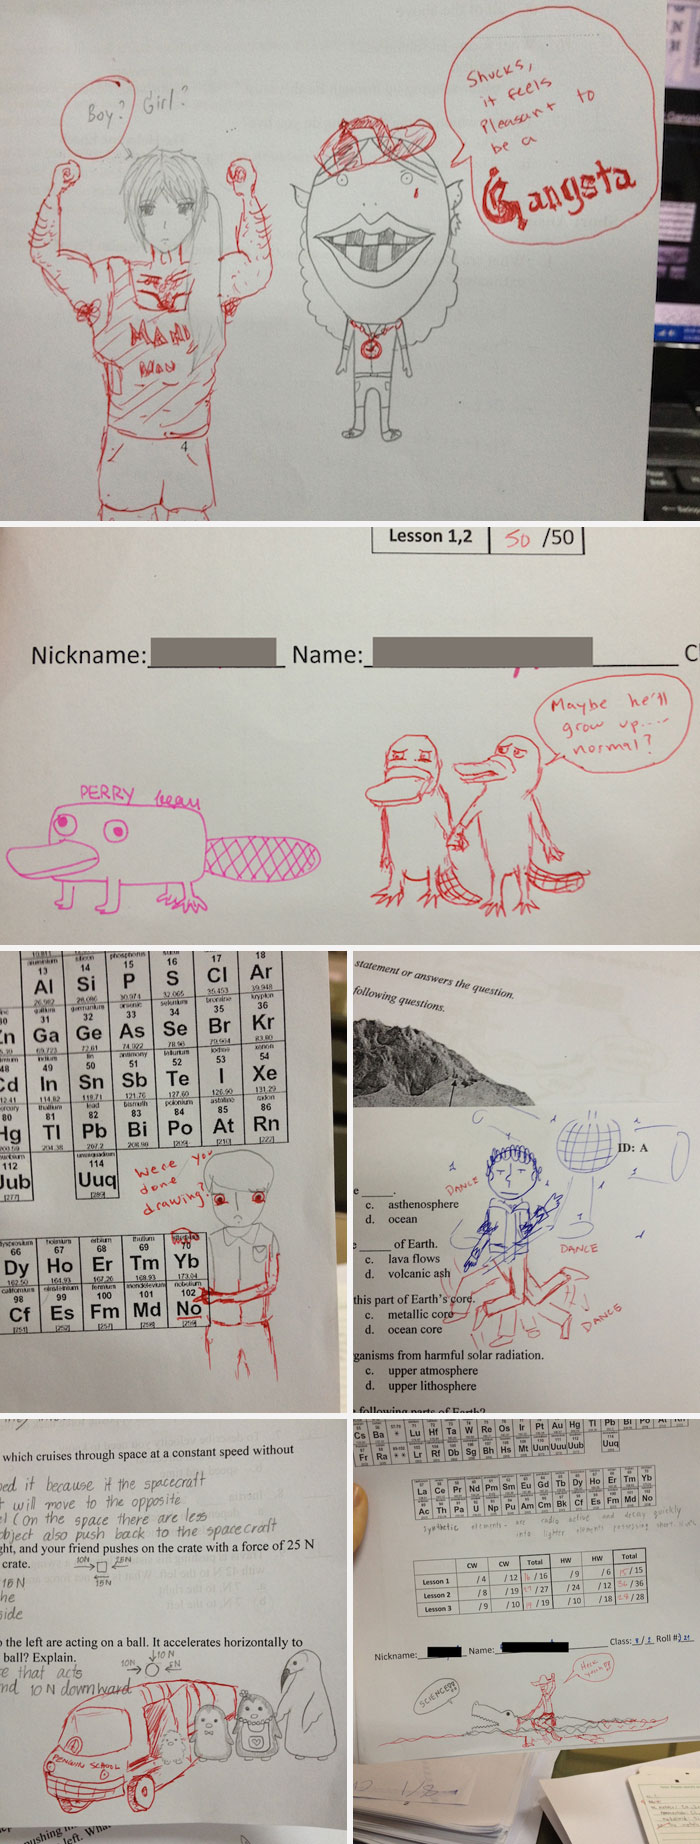 As An 8th To 9th-Grade Science Teacher, I Noticed My Students Would Draw A Lot On Their Papers. Anytime I Came Across A Drawing, I Added Something To It